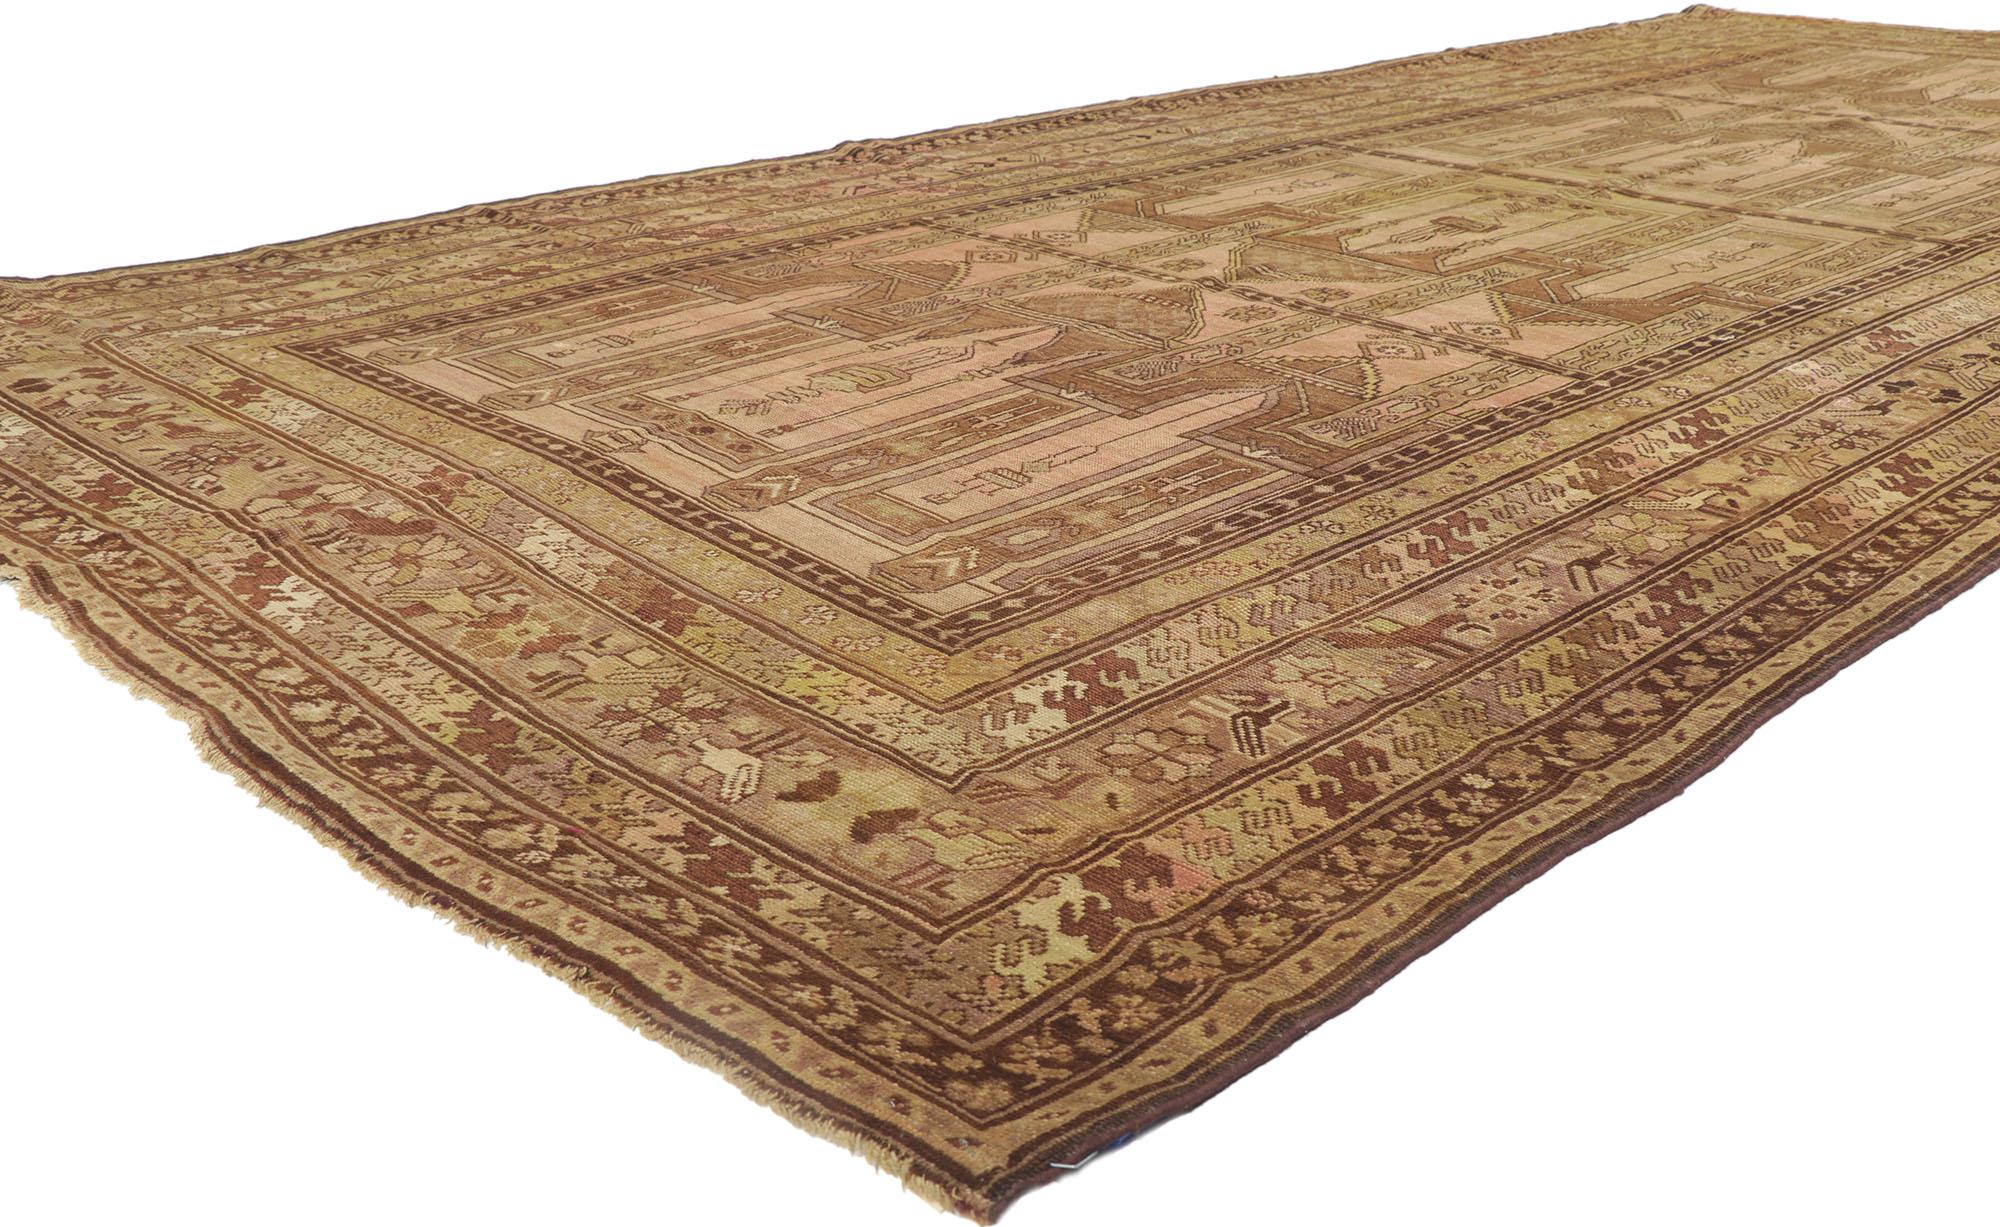 78188 Antique Turkish Prayer Rug with Multiple Mihrabs, 06'07 x 14'07.
Warm and inviting, this hand knotted antique Turkish prayer rug is a captivating vision of woven beauty. The composition features multiple mihrabs and enclosed with a series of